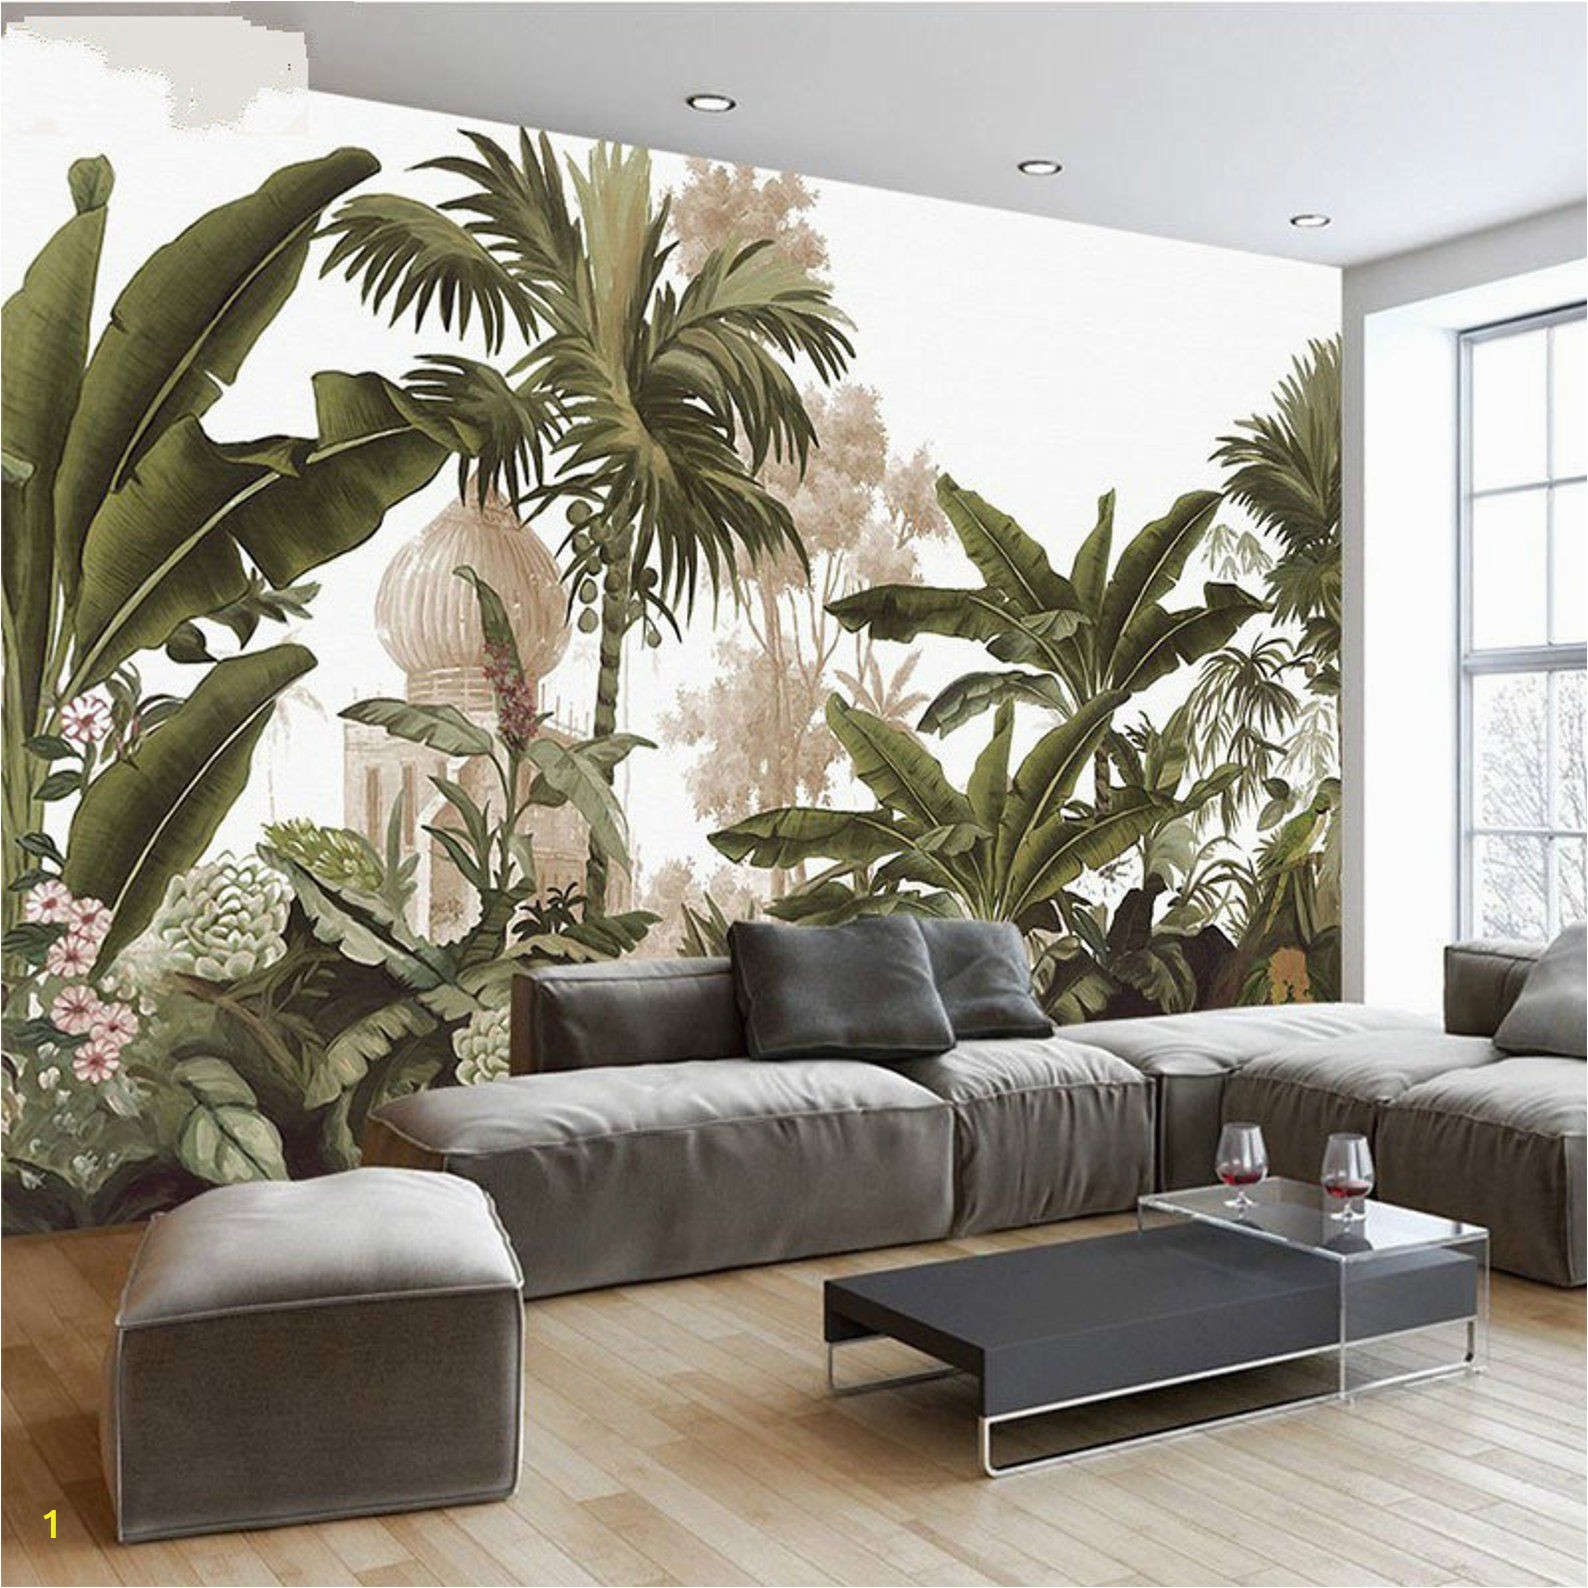 Mural On A Wall Hand Painted Tropical Rainforest forest Wallpaper Wall Mural